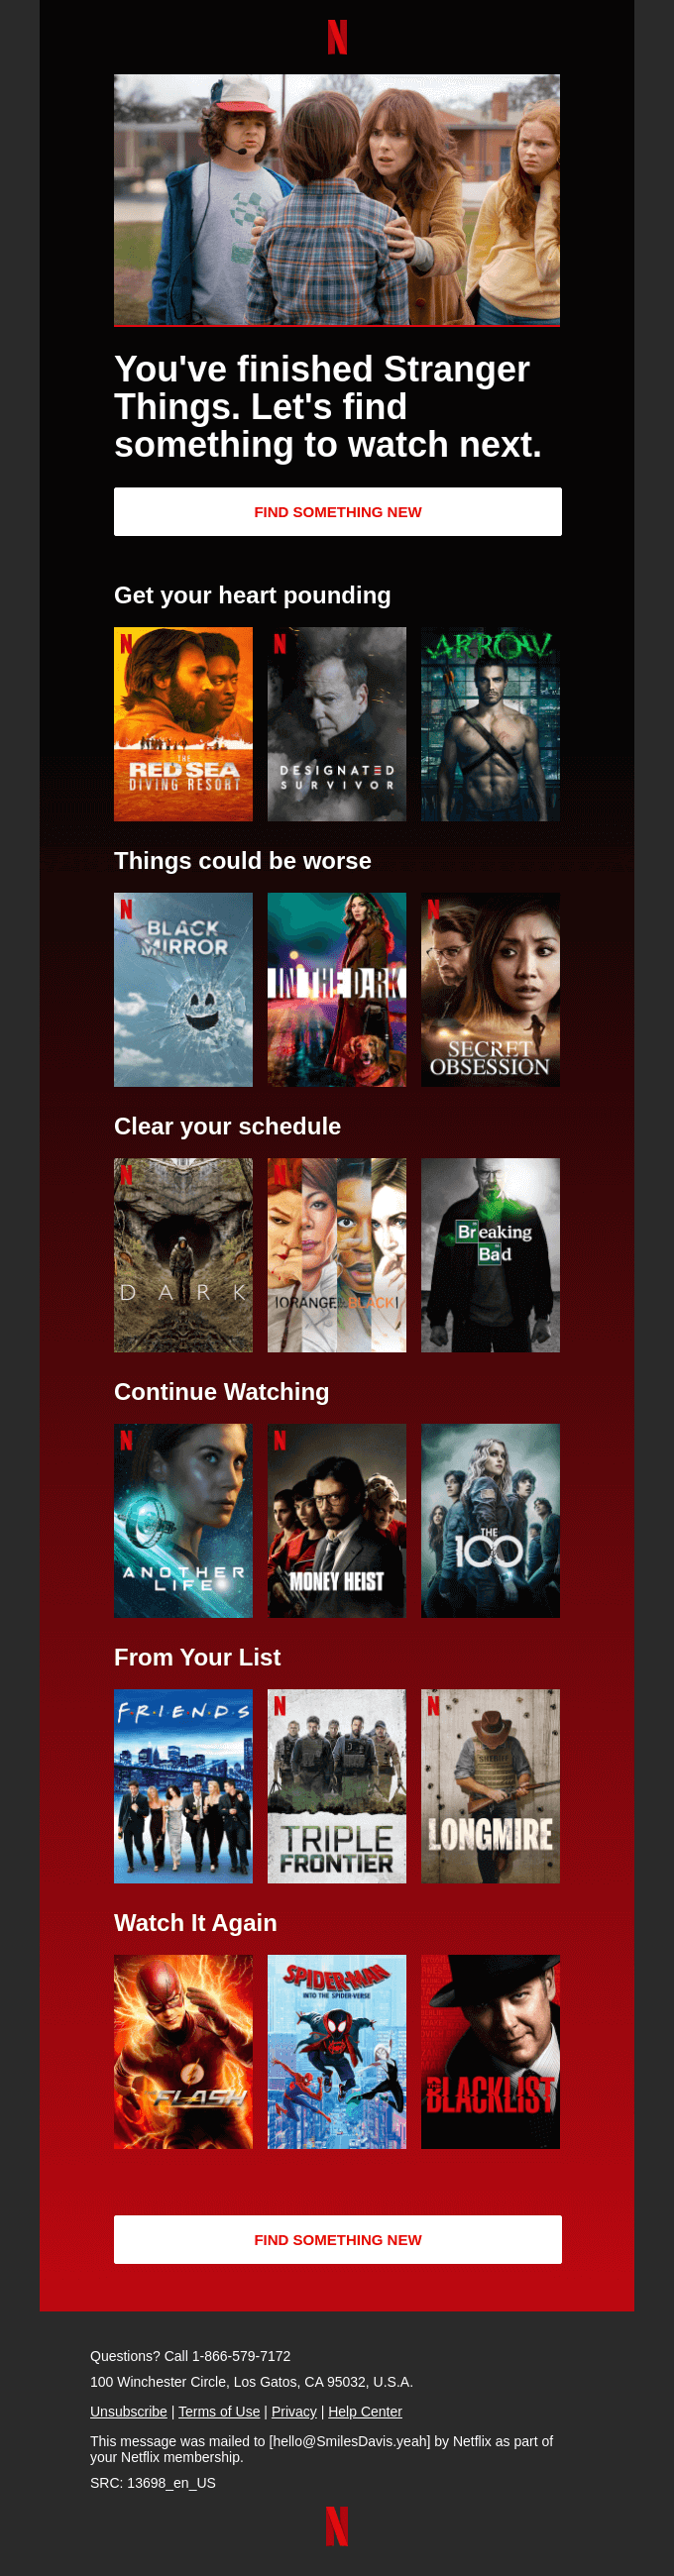 Example of Email Campaign by Netflix